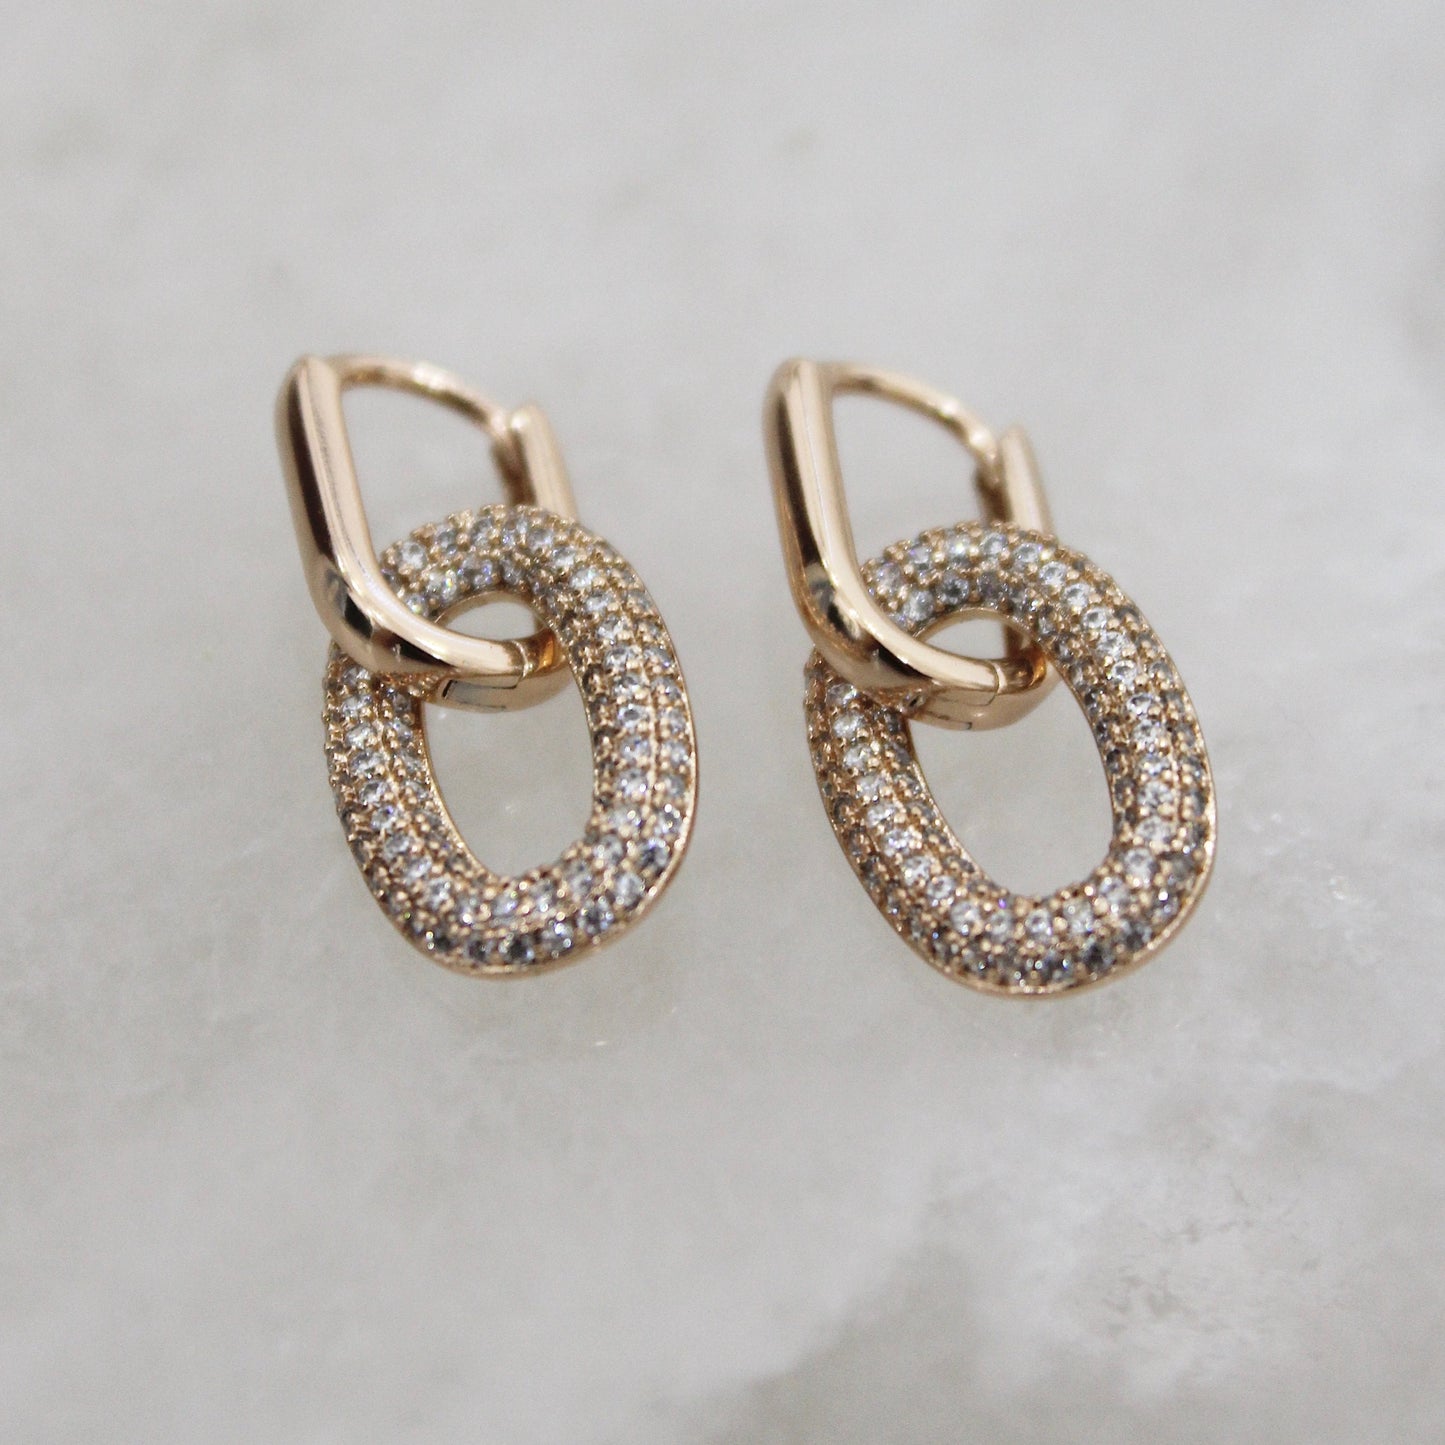 Link gold earrings with zirconias